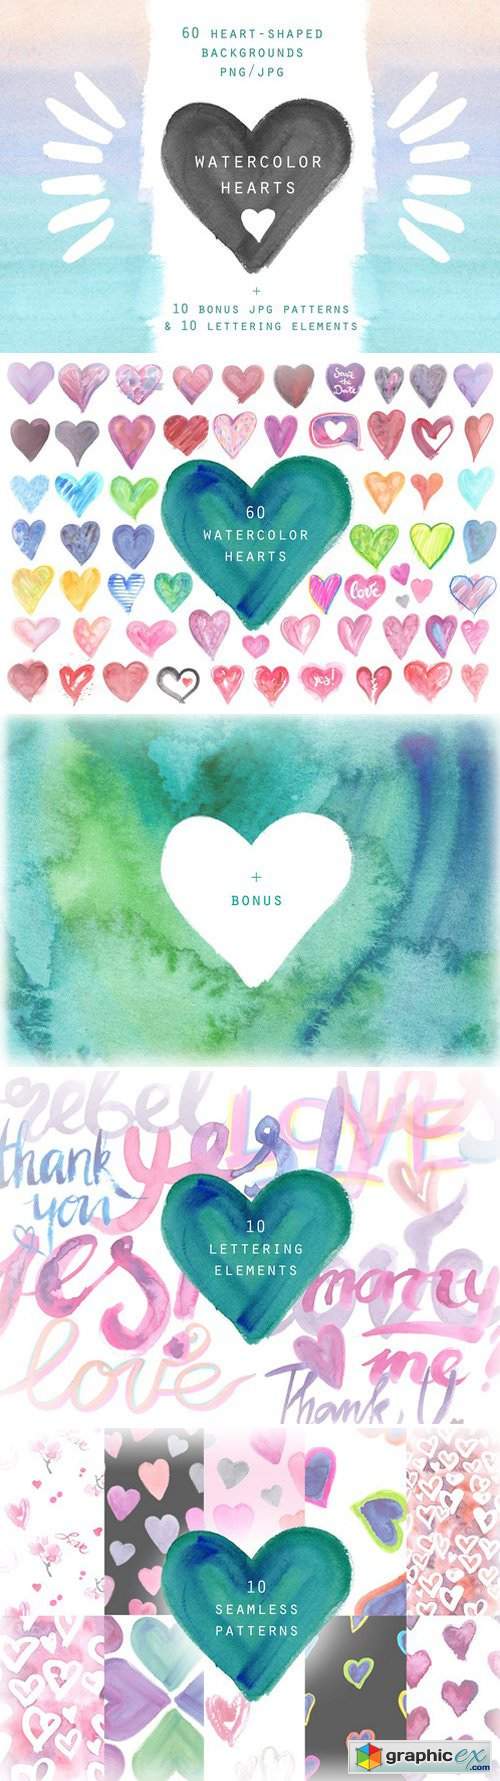 Watercolor hearts. Background set